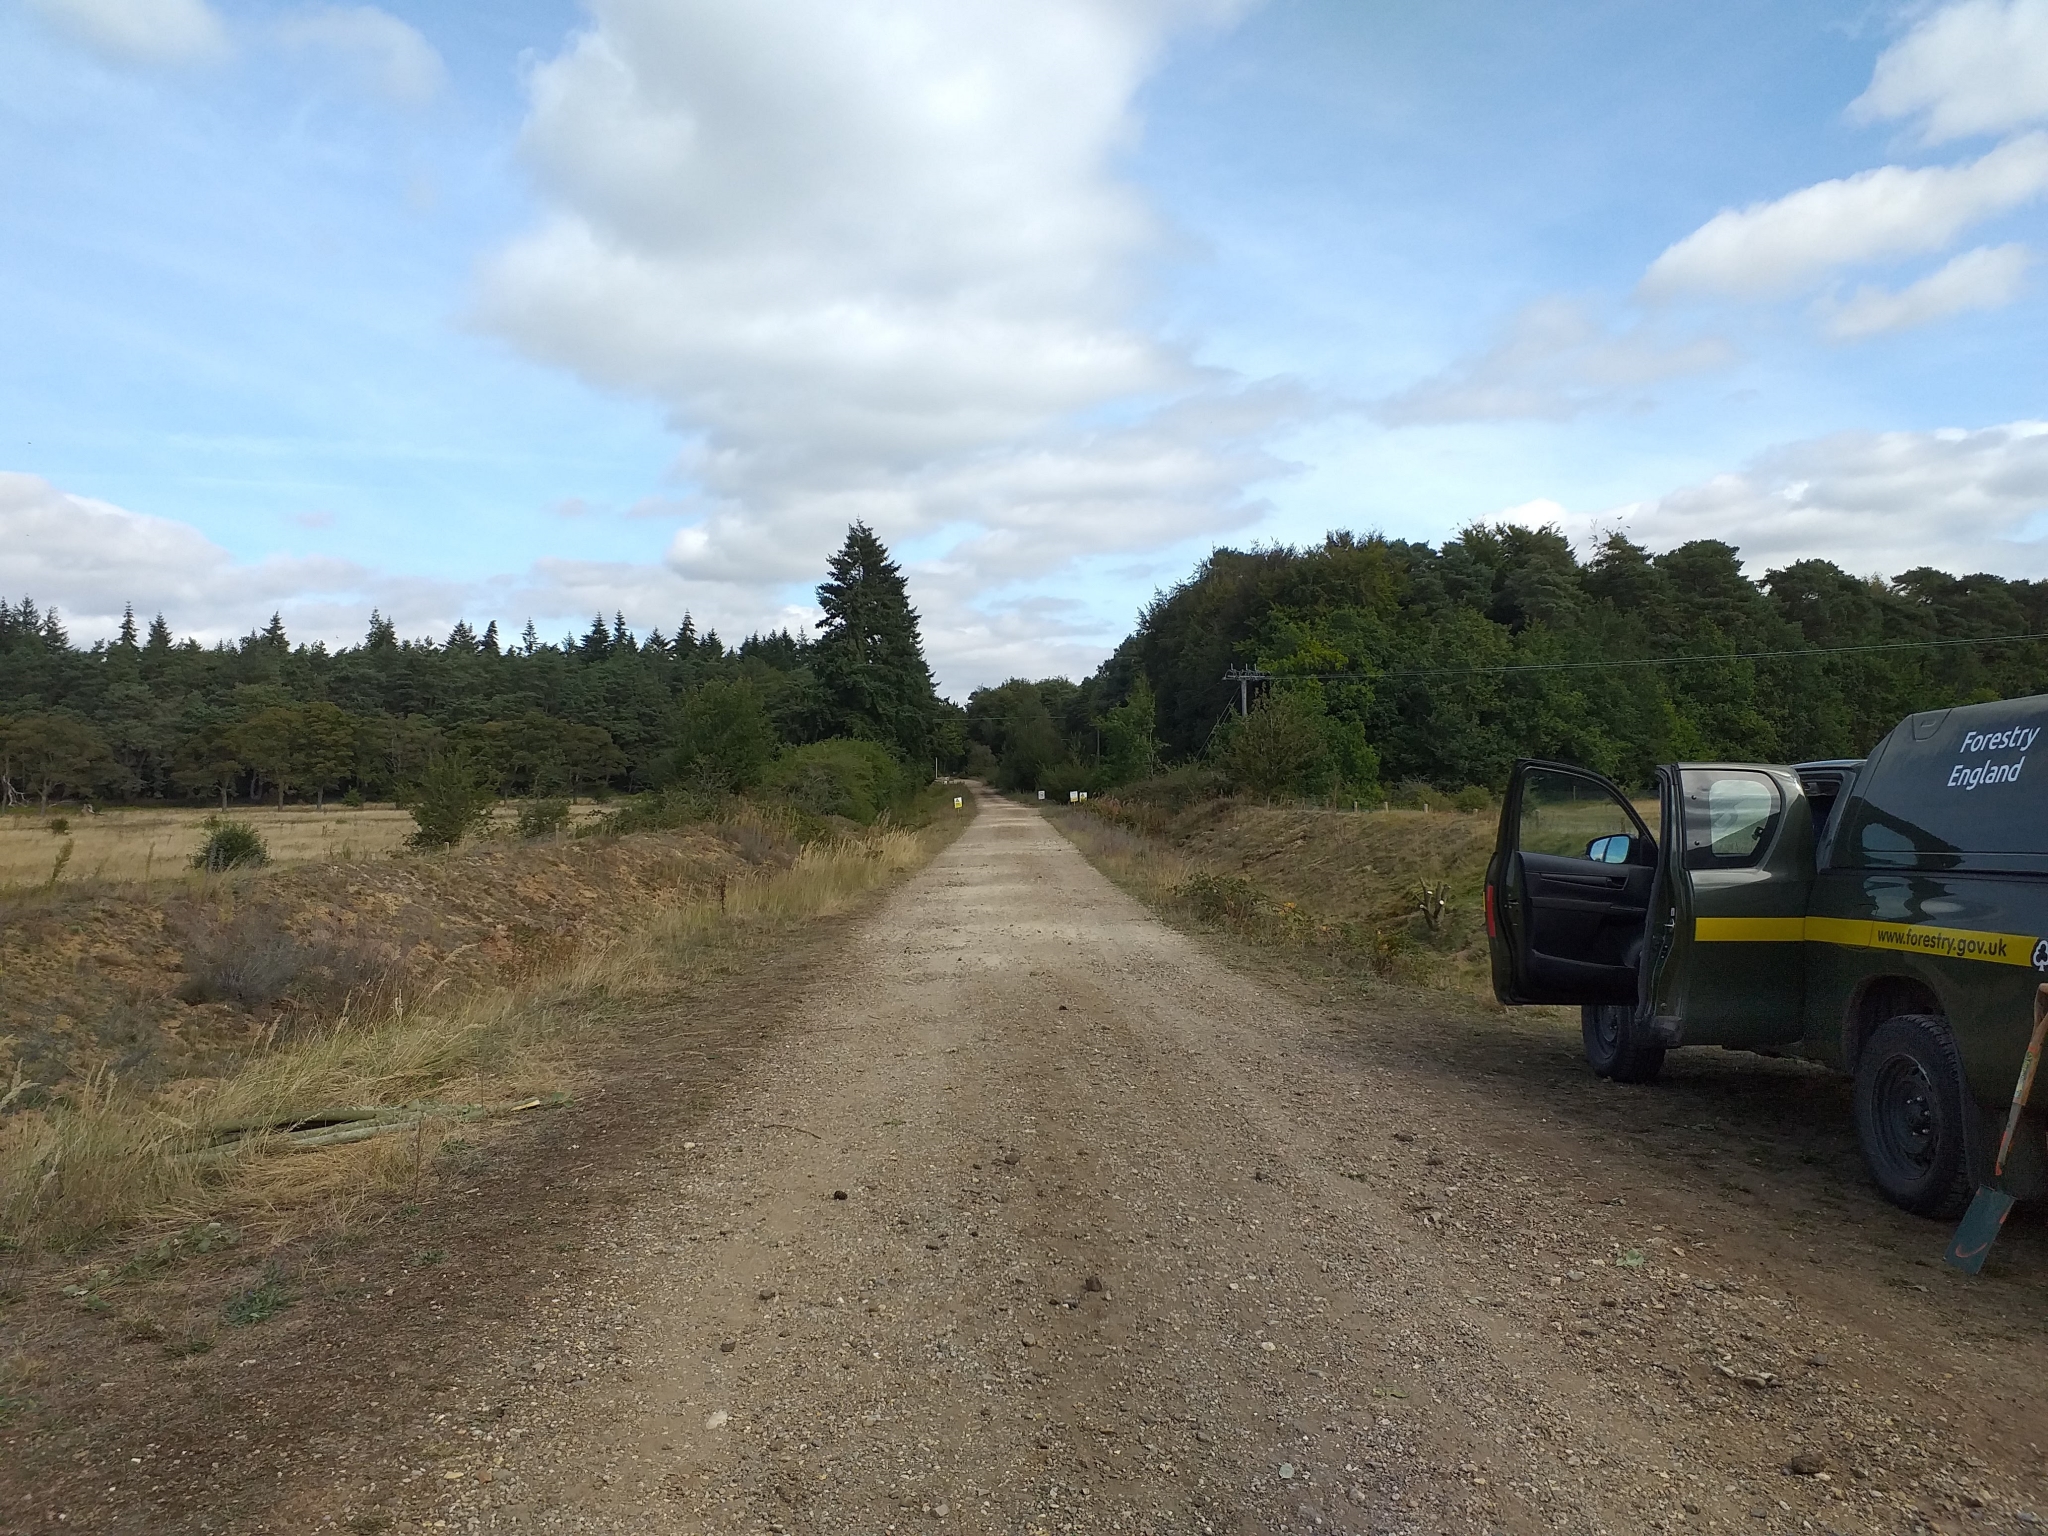 A photo from the FoTF Conservation Event - September 2019 - Scrub Clearance at Cranwich Camp : A view looking into Cranwich Camp